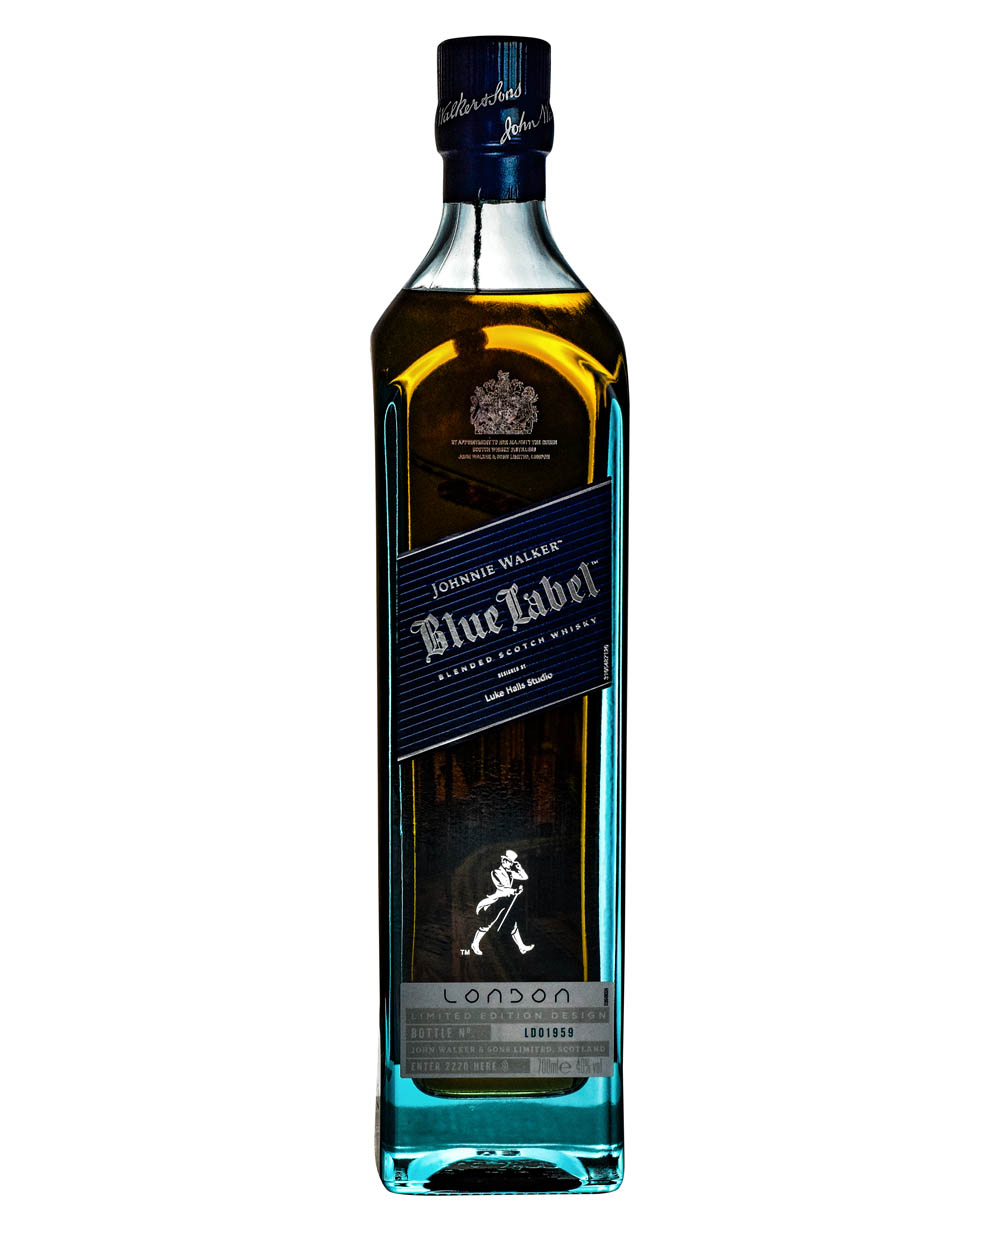 Johnnie Walker Blue Label London Cities of the Future 2220